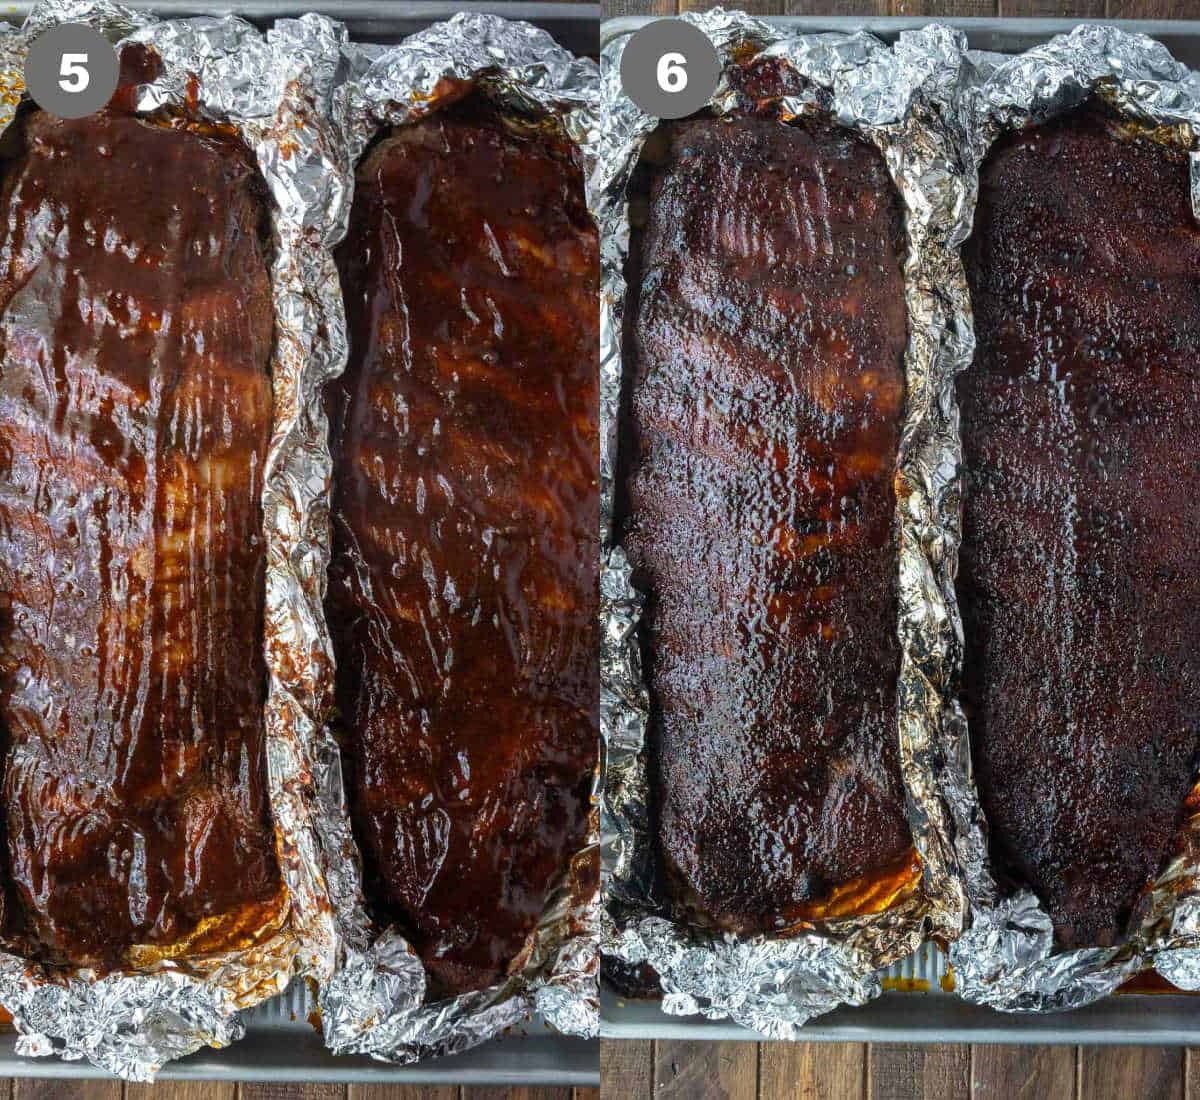 Bbq sauce brushed on top of the ribs then broiled.